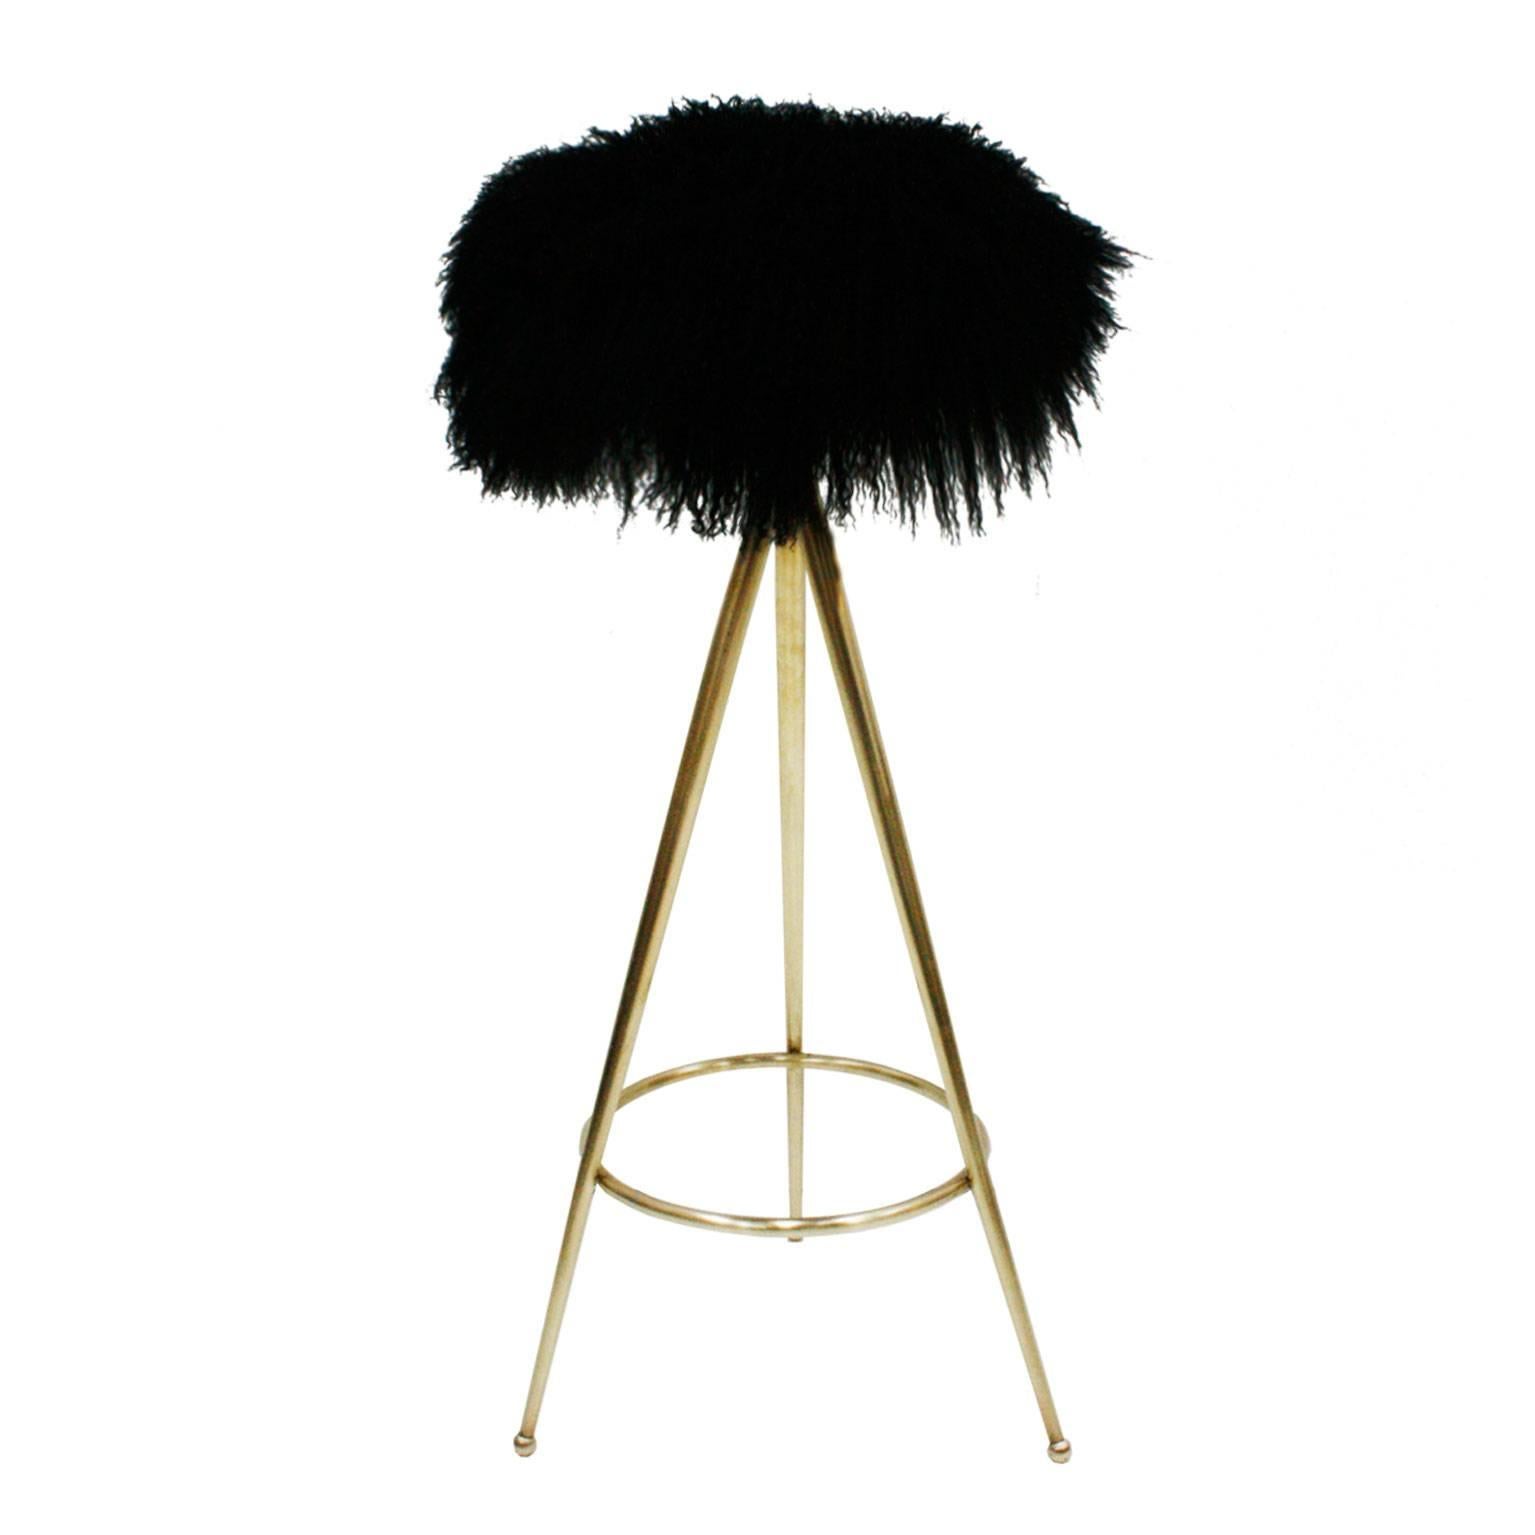 Pair of stools designed by Gio Ponti, upholstered in natural Mongolian goat fur.